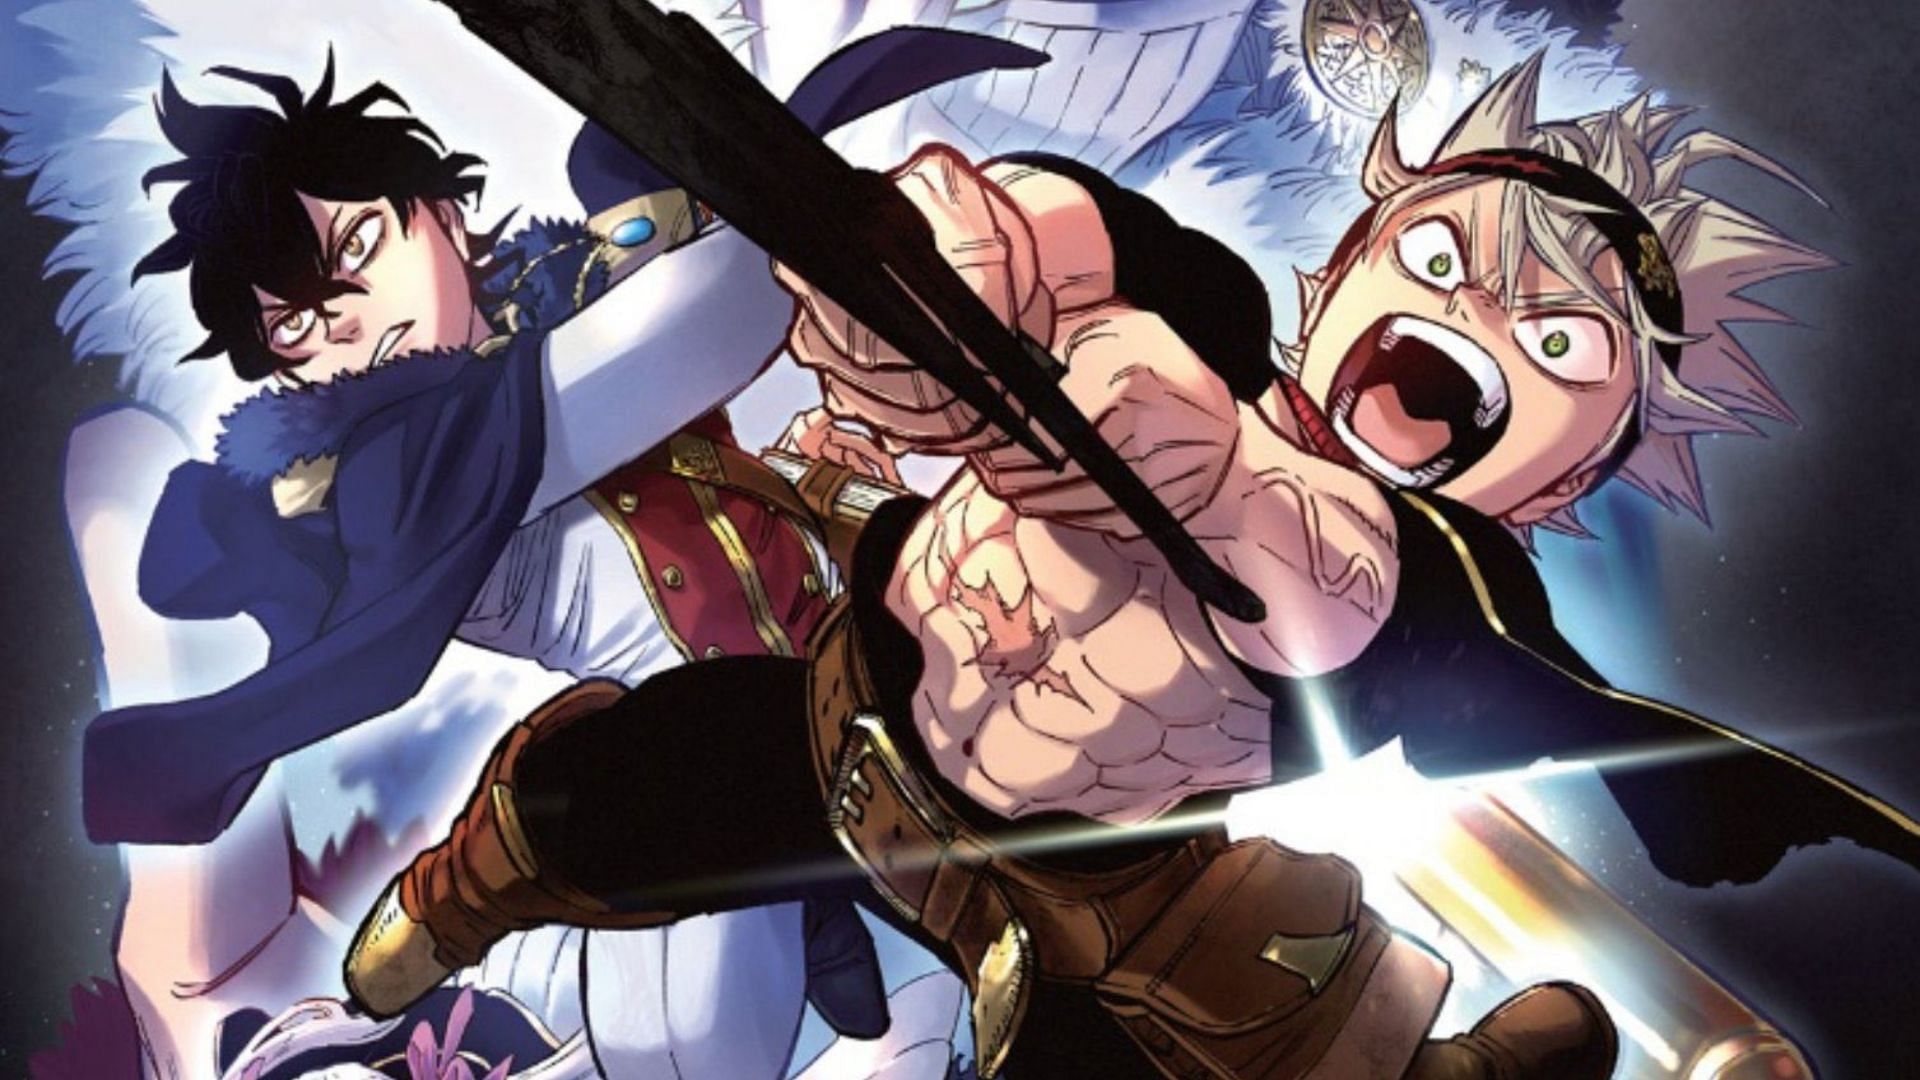 Black Clover chapter 369: Major Spoilers to expect